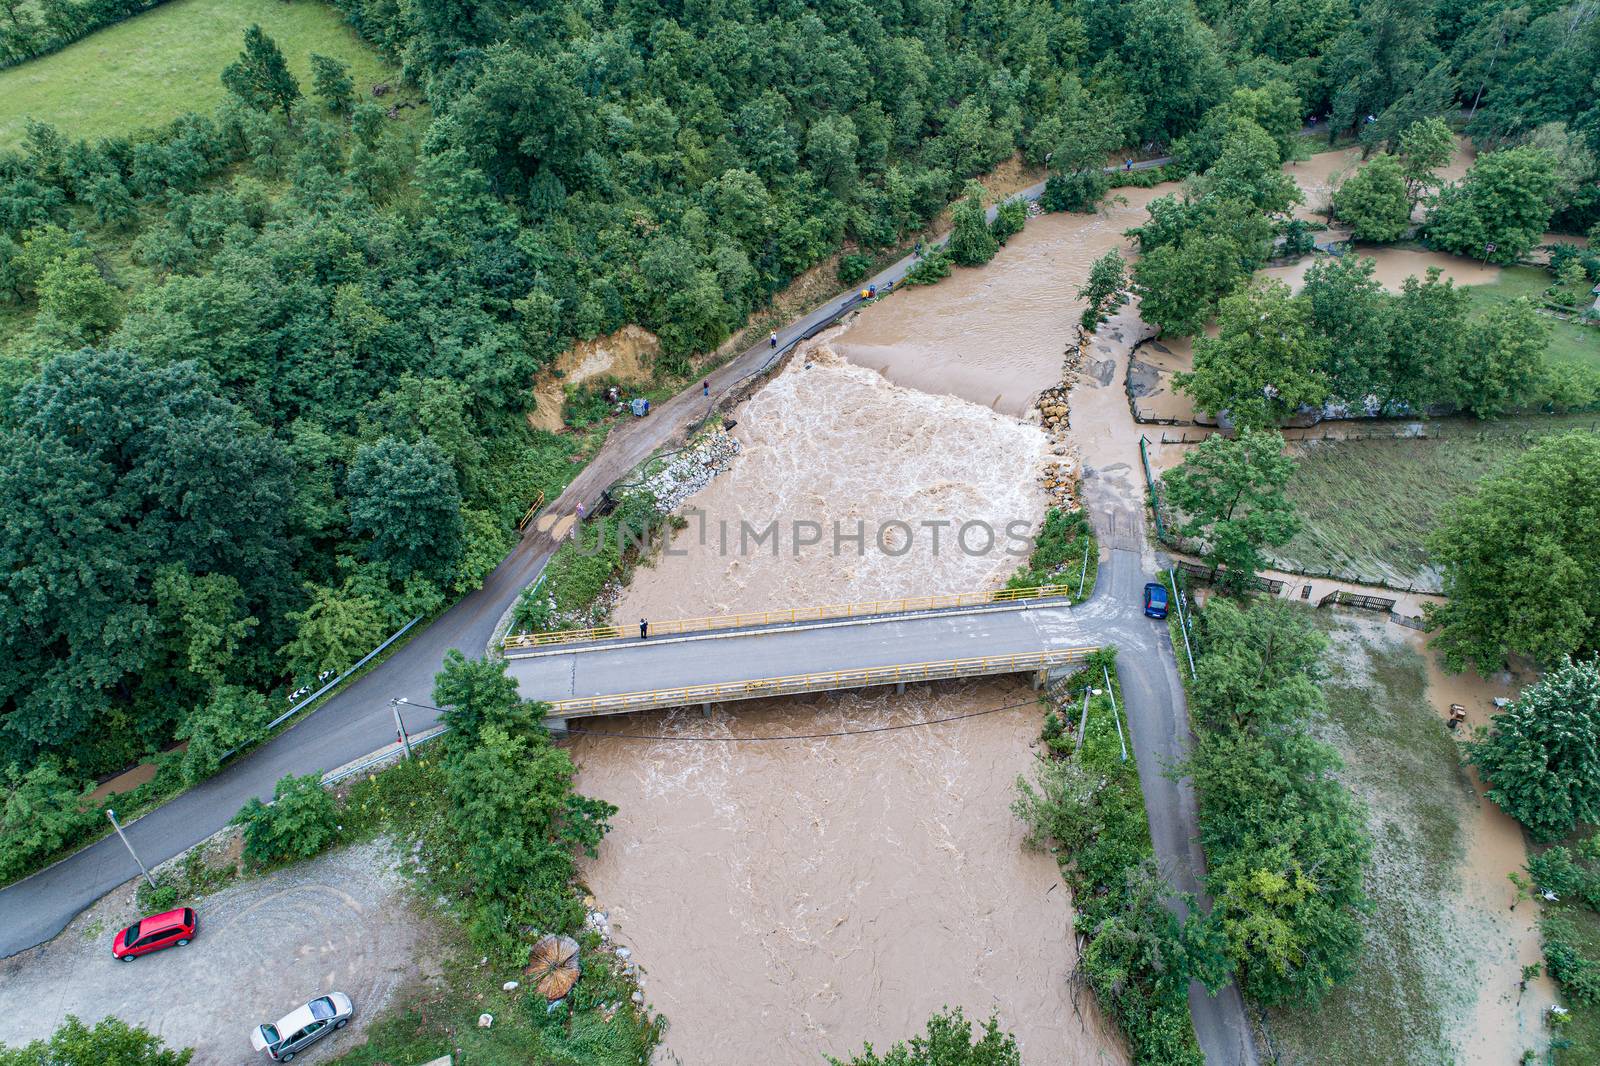 A river that overflows threatens the road bridge and property by adamr